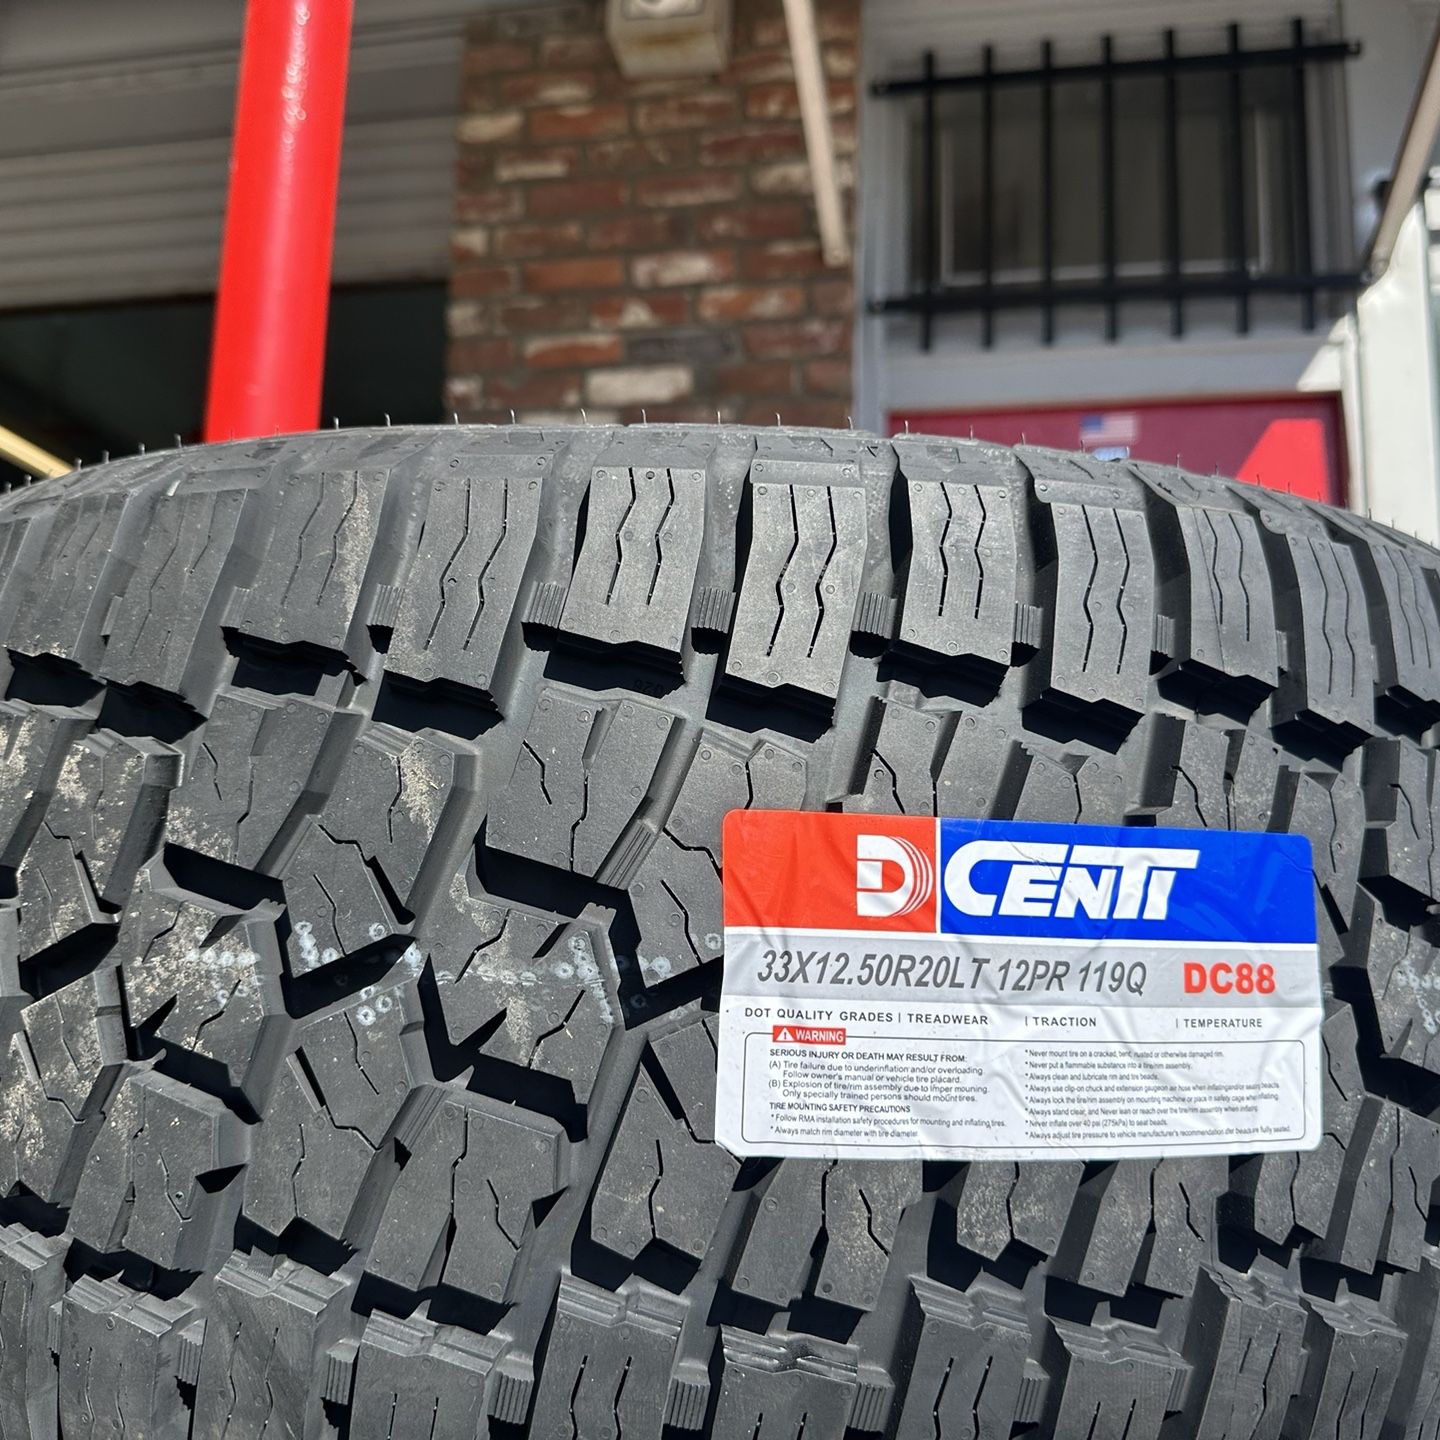  SELLING BRAND NEW TIRES @ LOWEST PRICE CALL OR MESSAGE